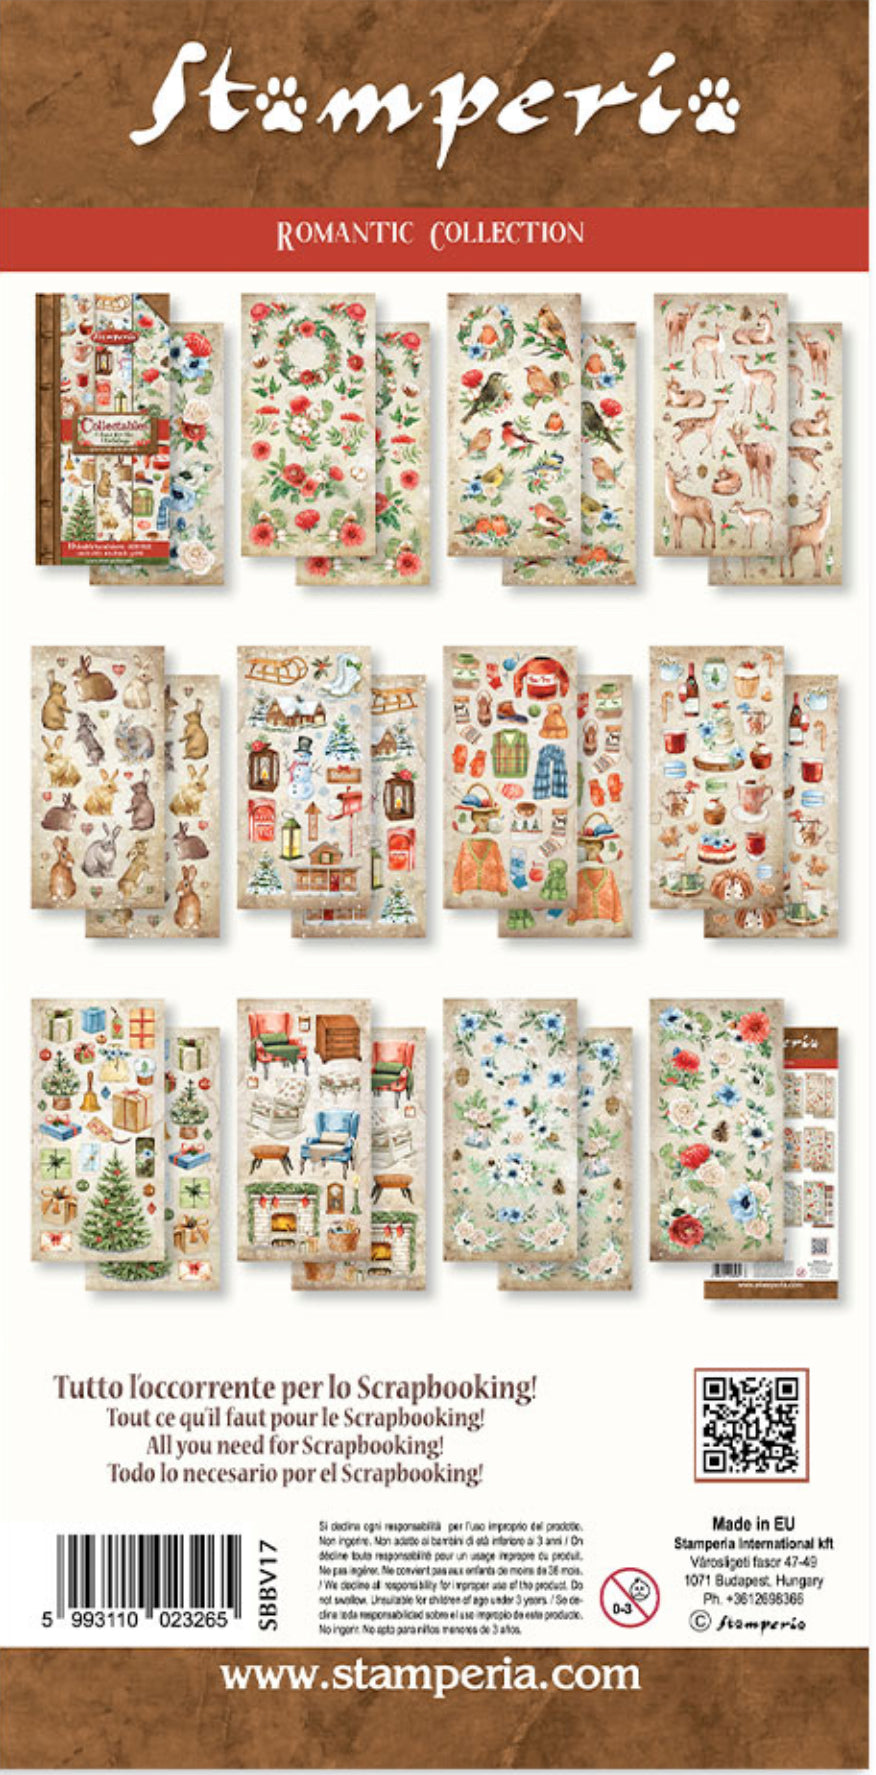 STAMPERIA 8x8 Paper Pack: Romantic Collection - Garden House